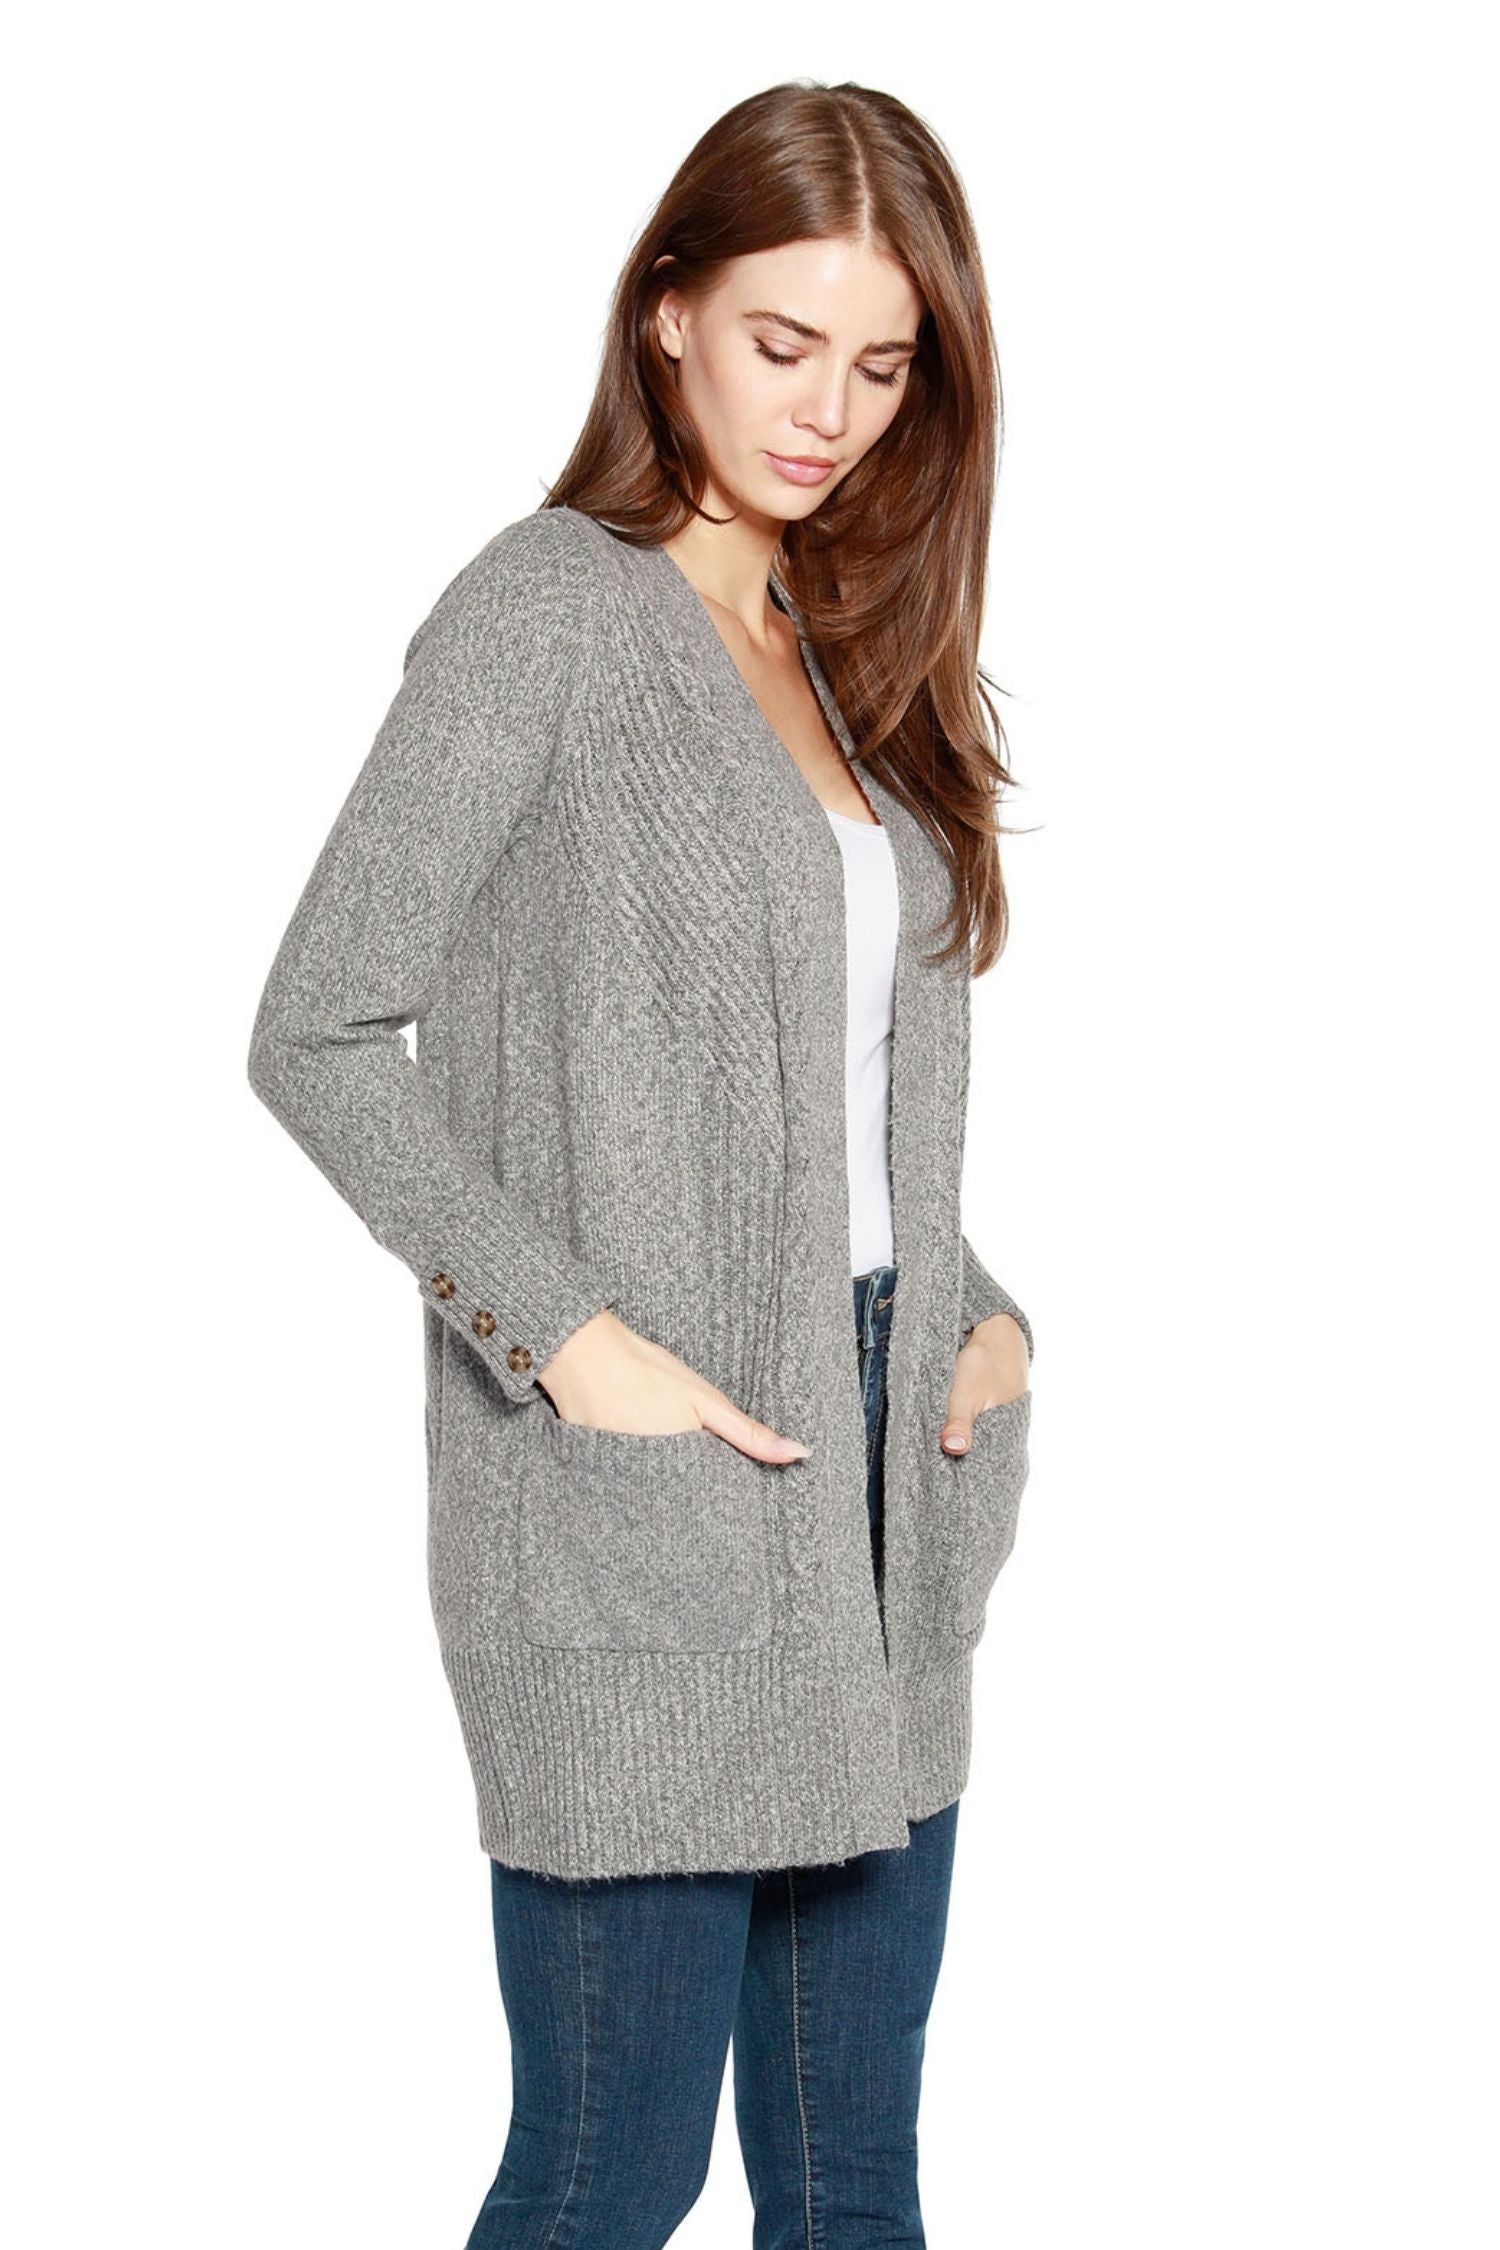 Womens Long Light Sweater Open Front Cardigan with Pockets